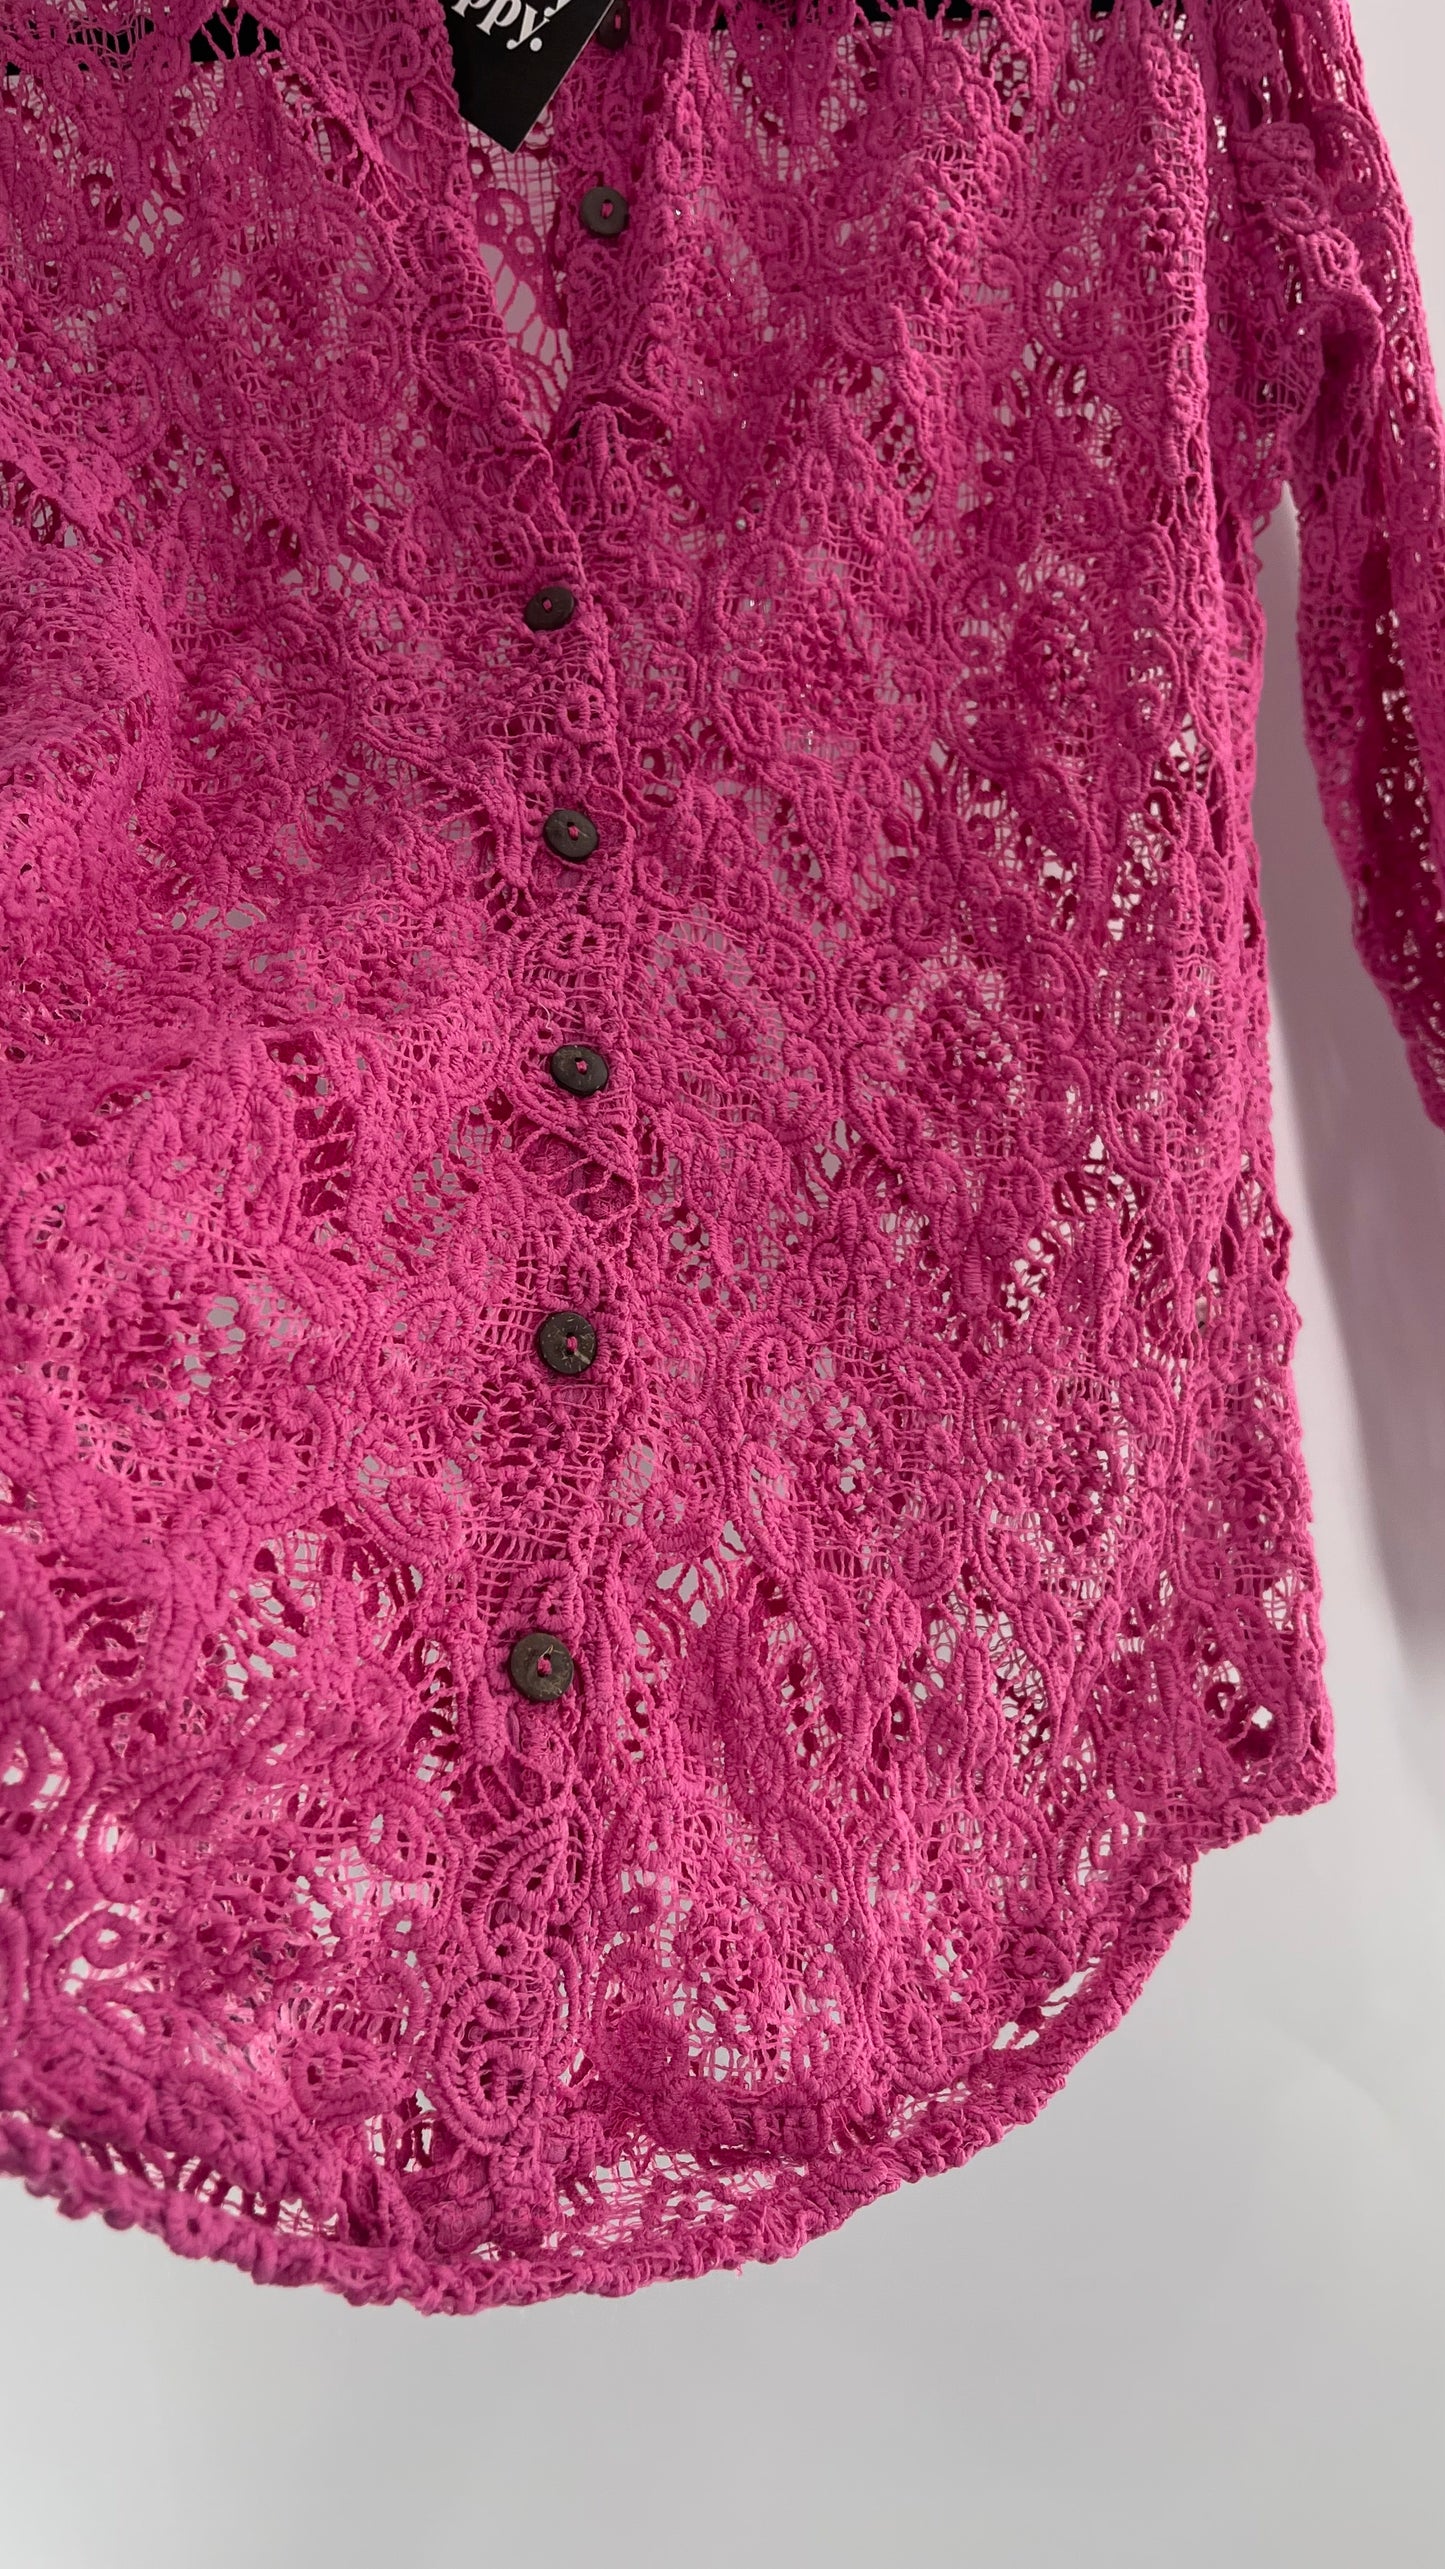 Free People Until Sunday Fuchsia Purple/ Pink Thick Lace Button Front Blouse with Coconut Buttons (XS)